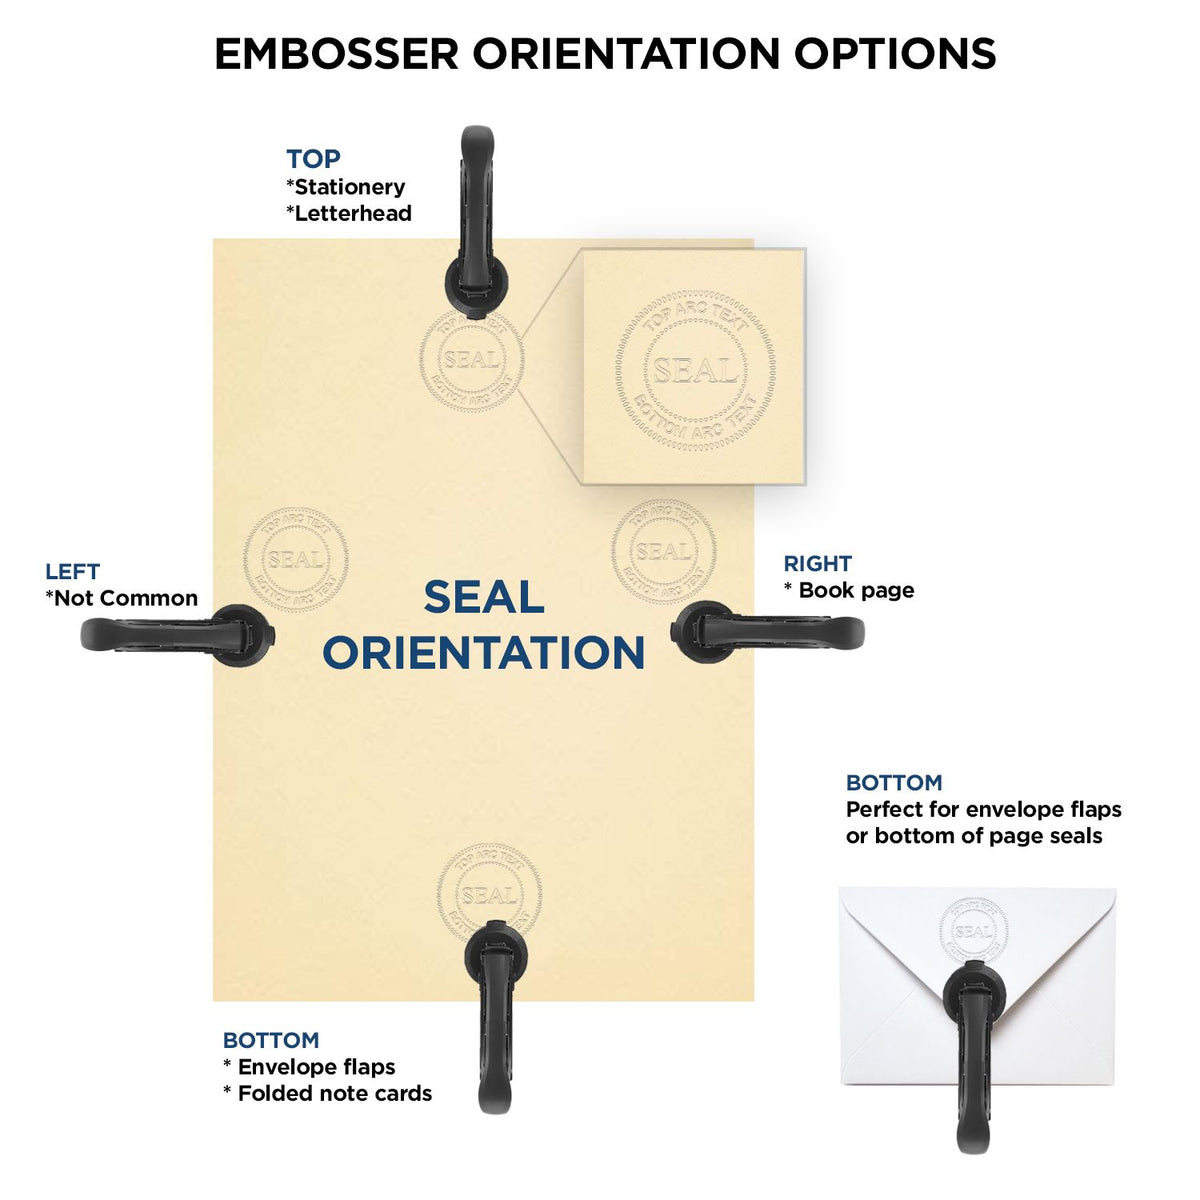 An infographic for the Hybrid Michigan Land Surveyor Seal showing embosser orientation, this is showing examples of a top, bottom, right and left insert.